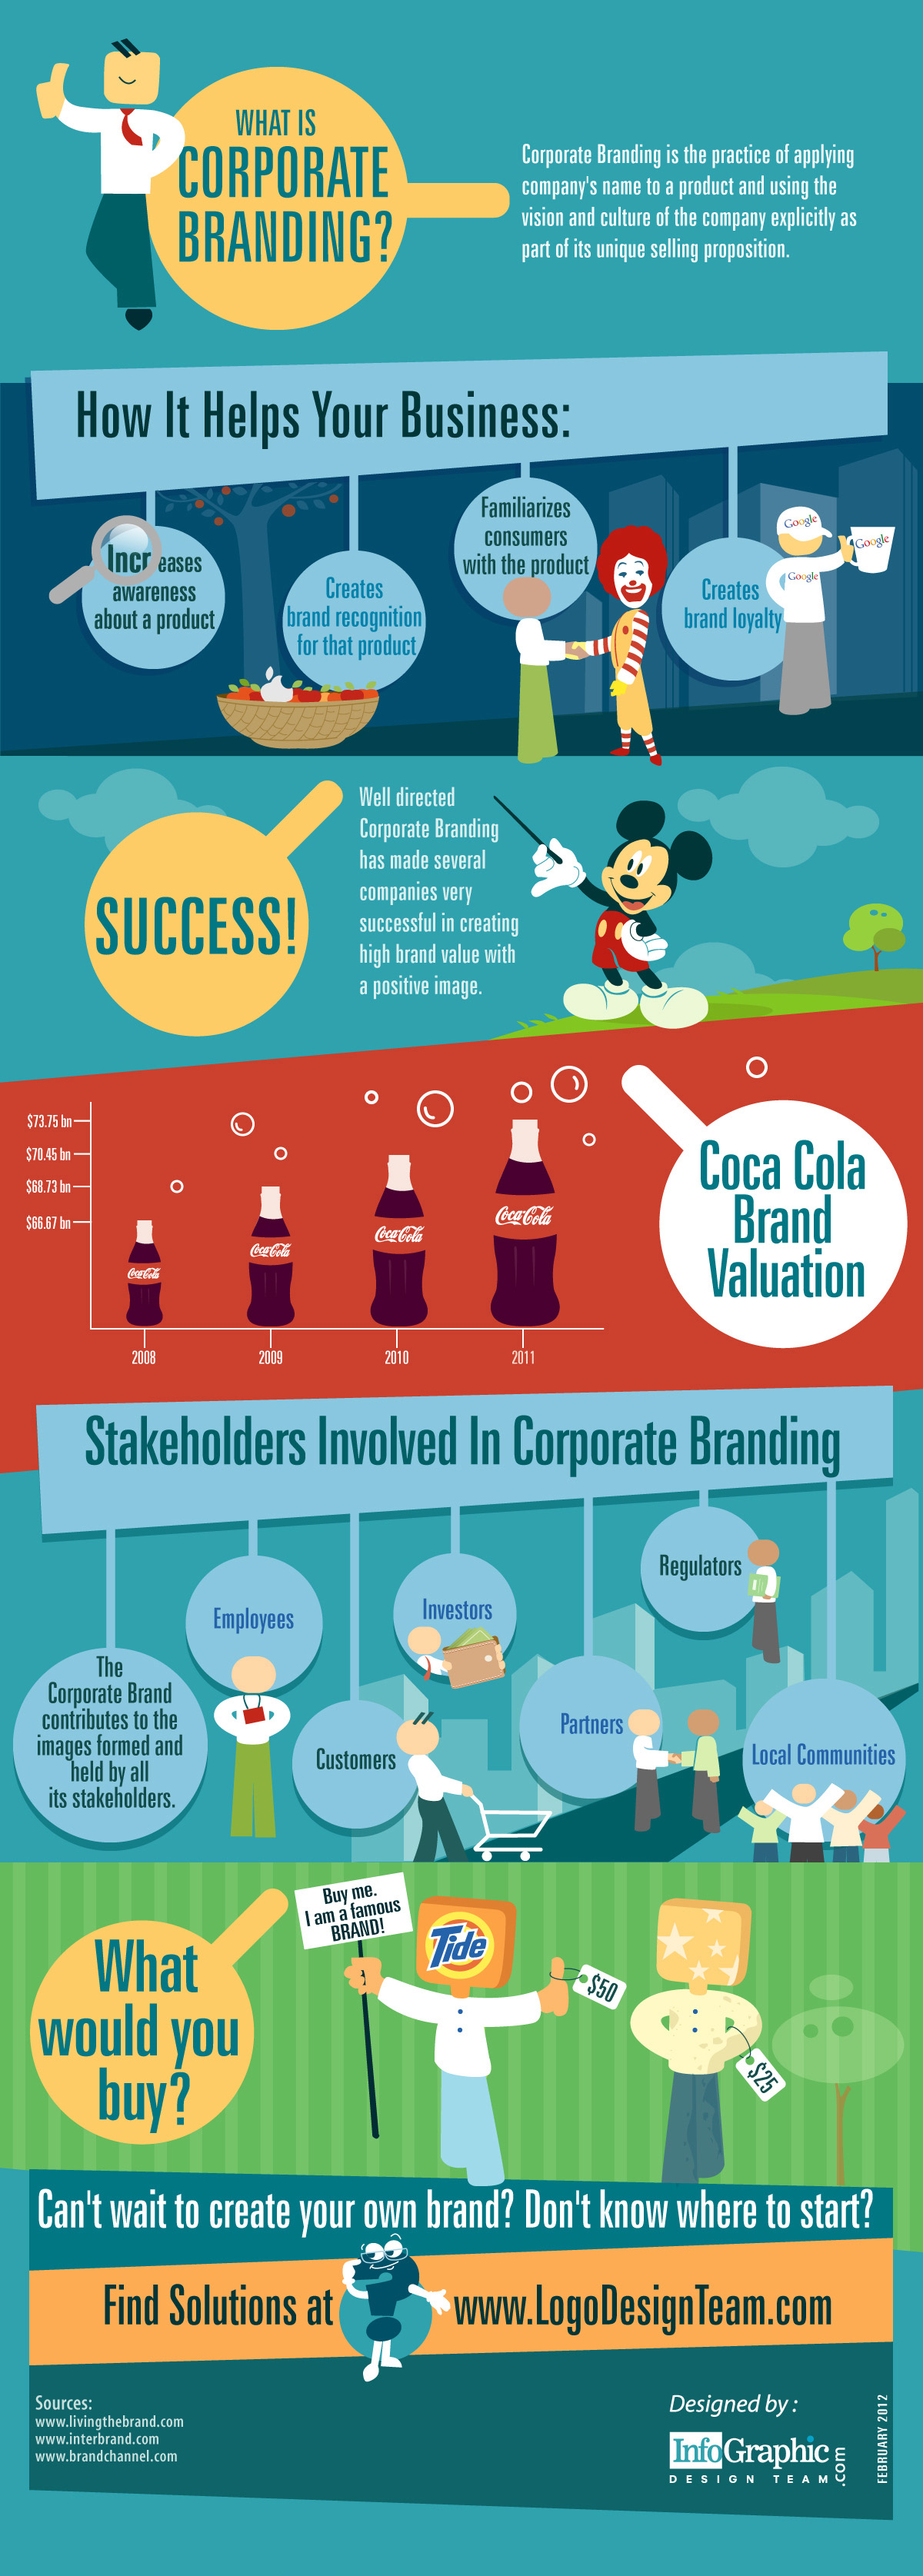 What Is Corporate Branding?